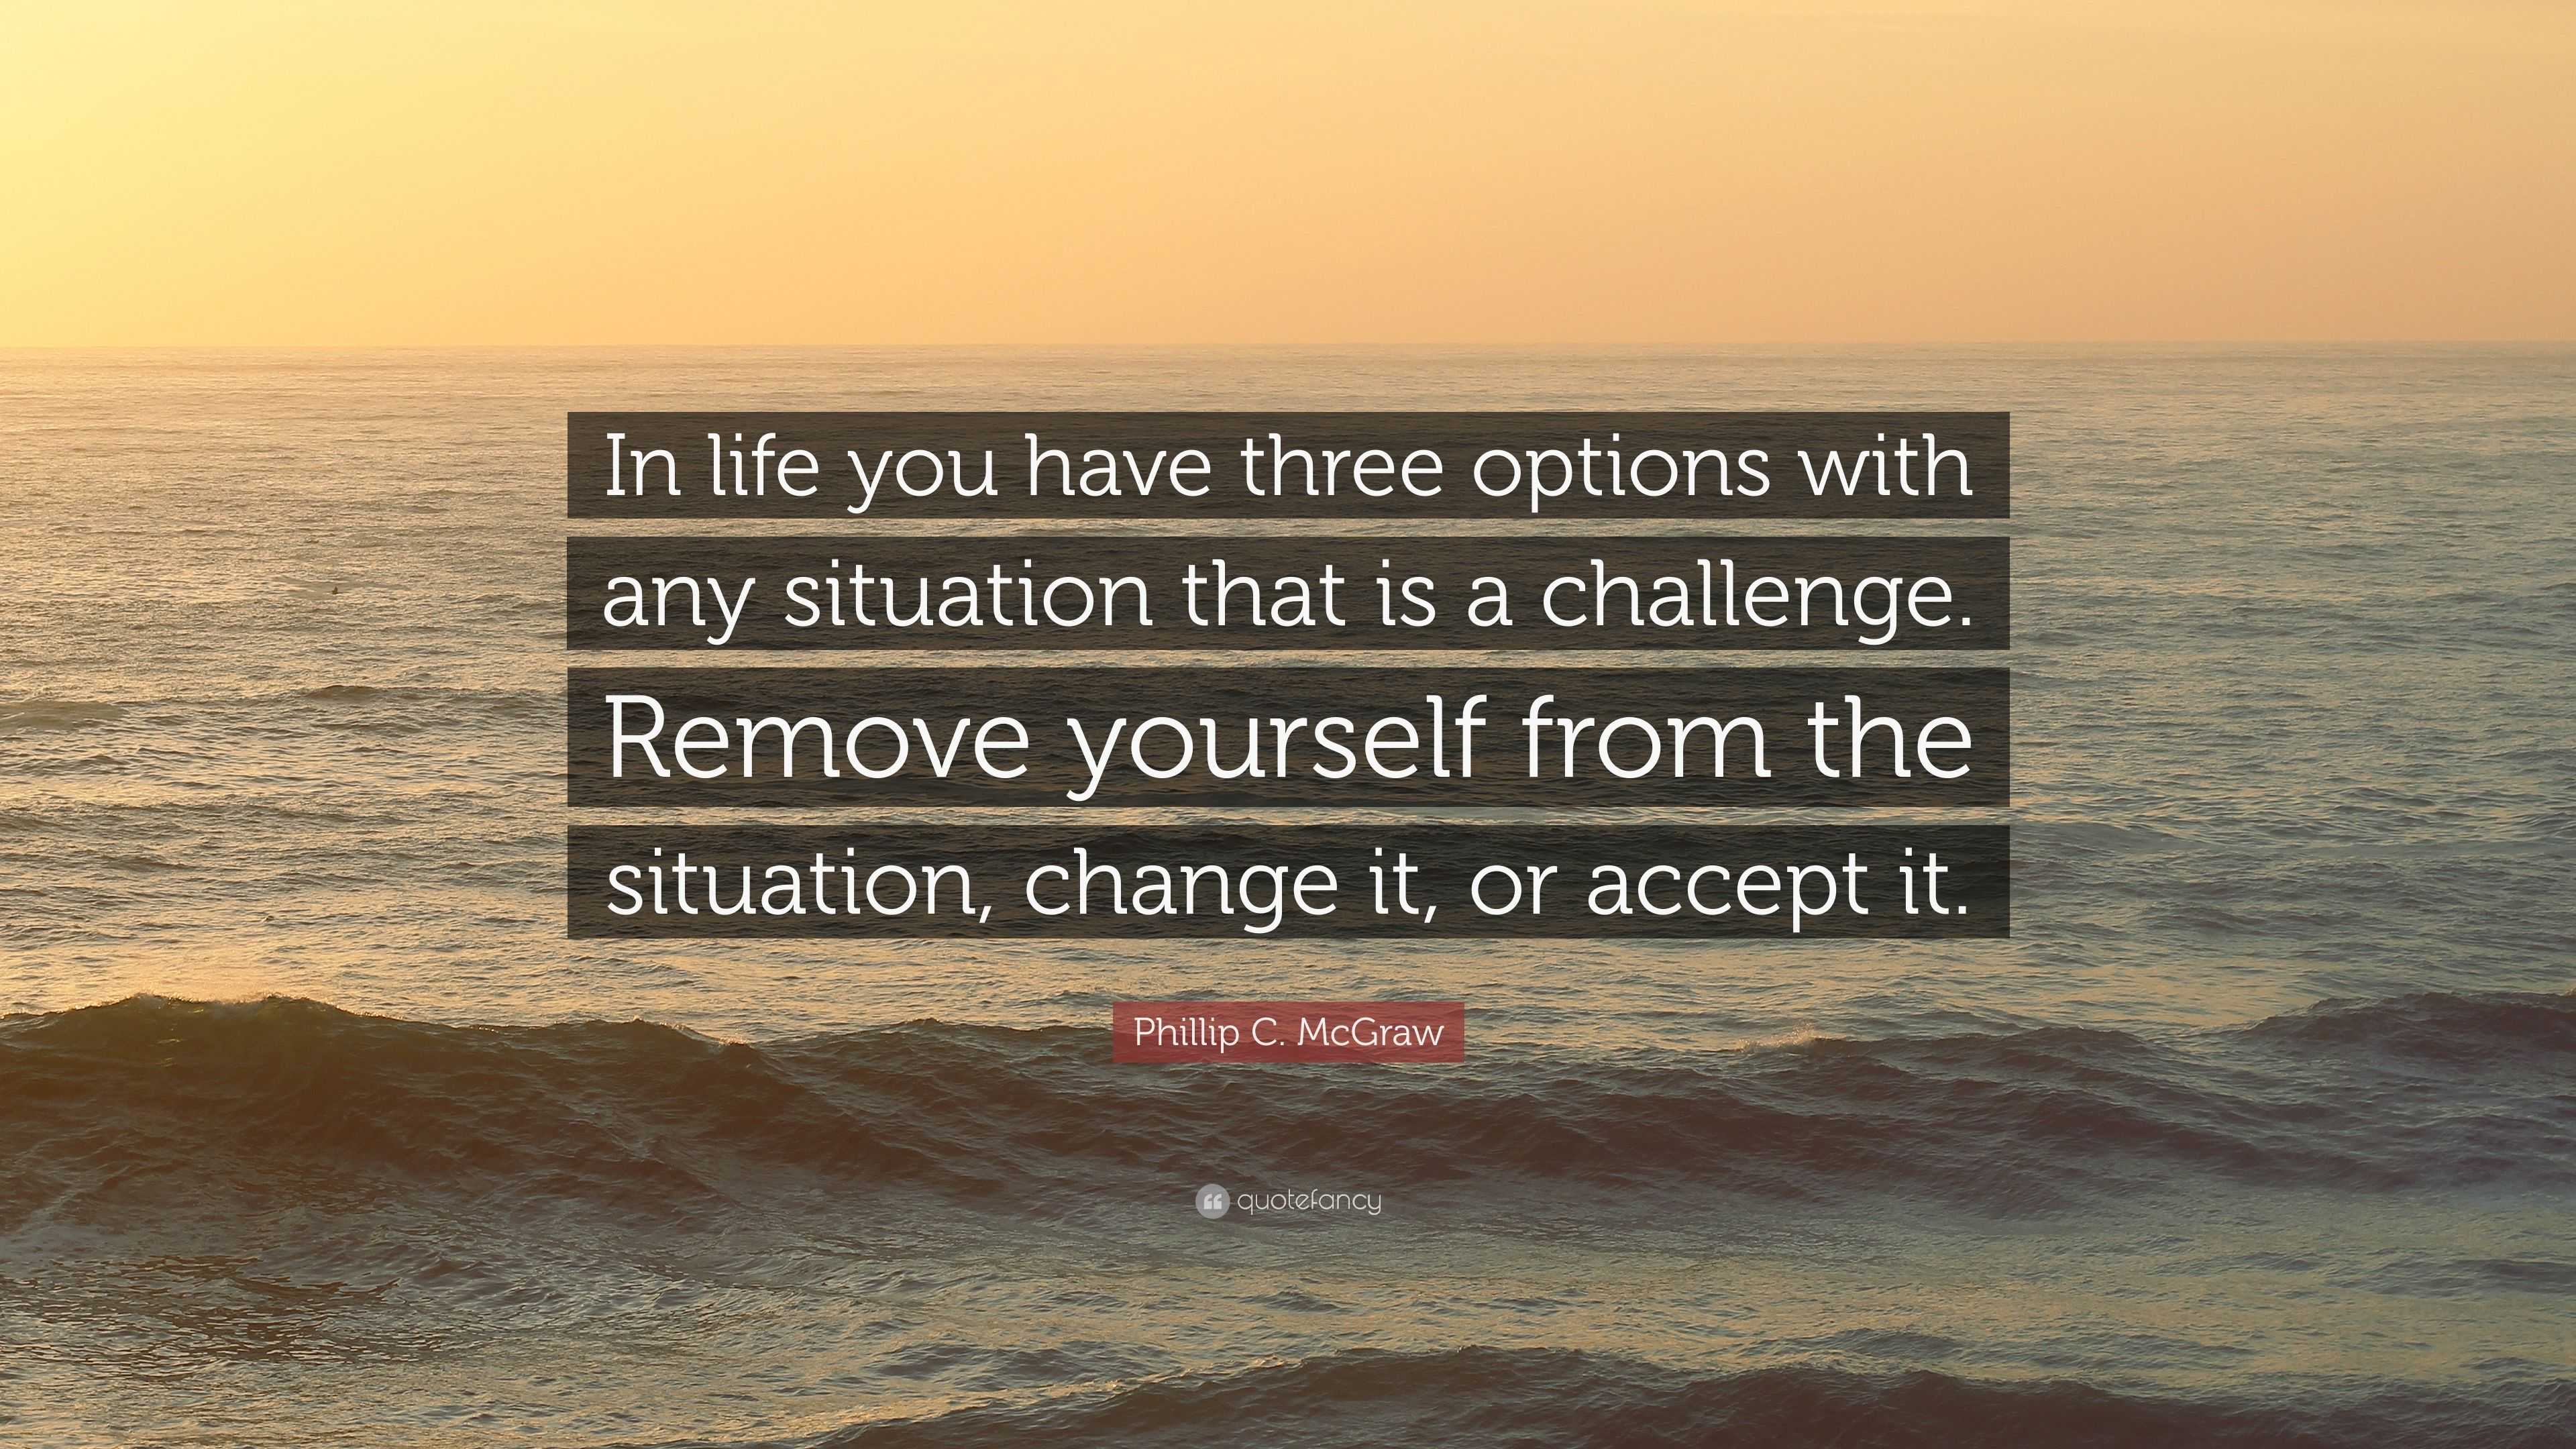 Phillip C. Mcgraw Quote: “In Life You Have Three Options With Any Situation That Is A Challenge. Remove Yourself From The Situation, Change It, Or...”